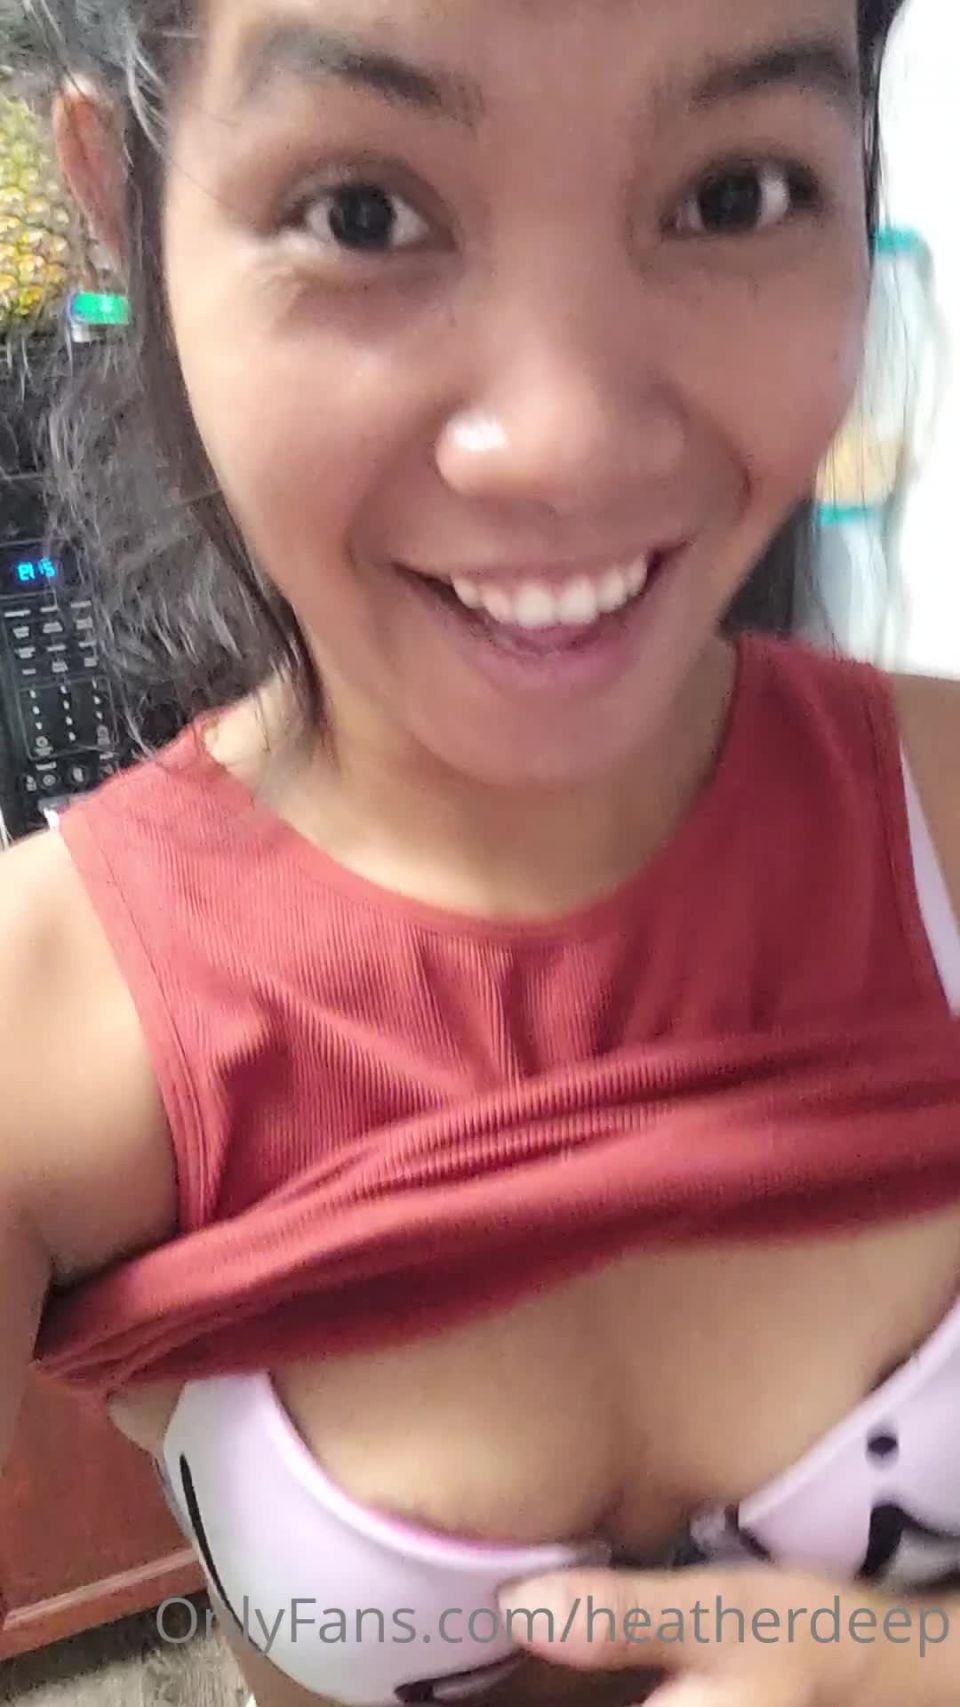 Onlyfans - heatherdeep - Dady you want me to cooking your breakfast  morning tits milk hornygirl thaigirl - 23-10-2021